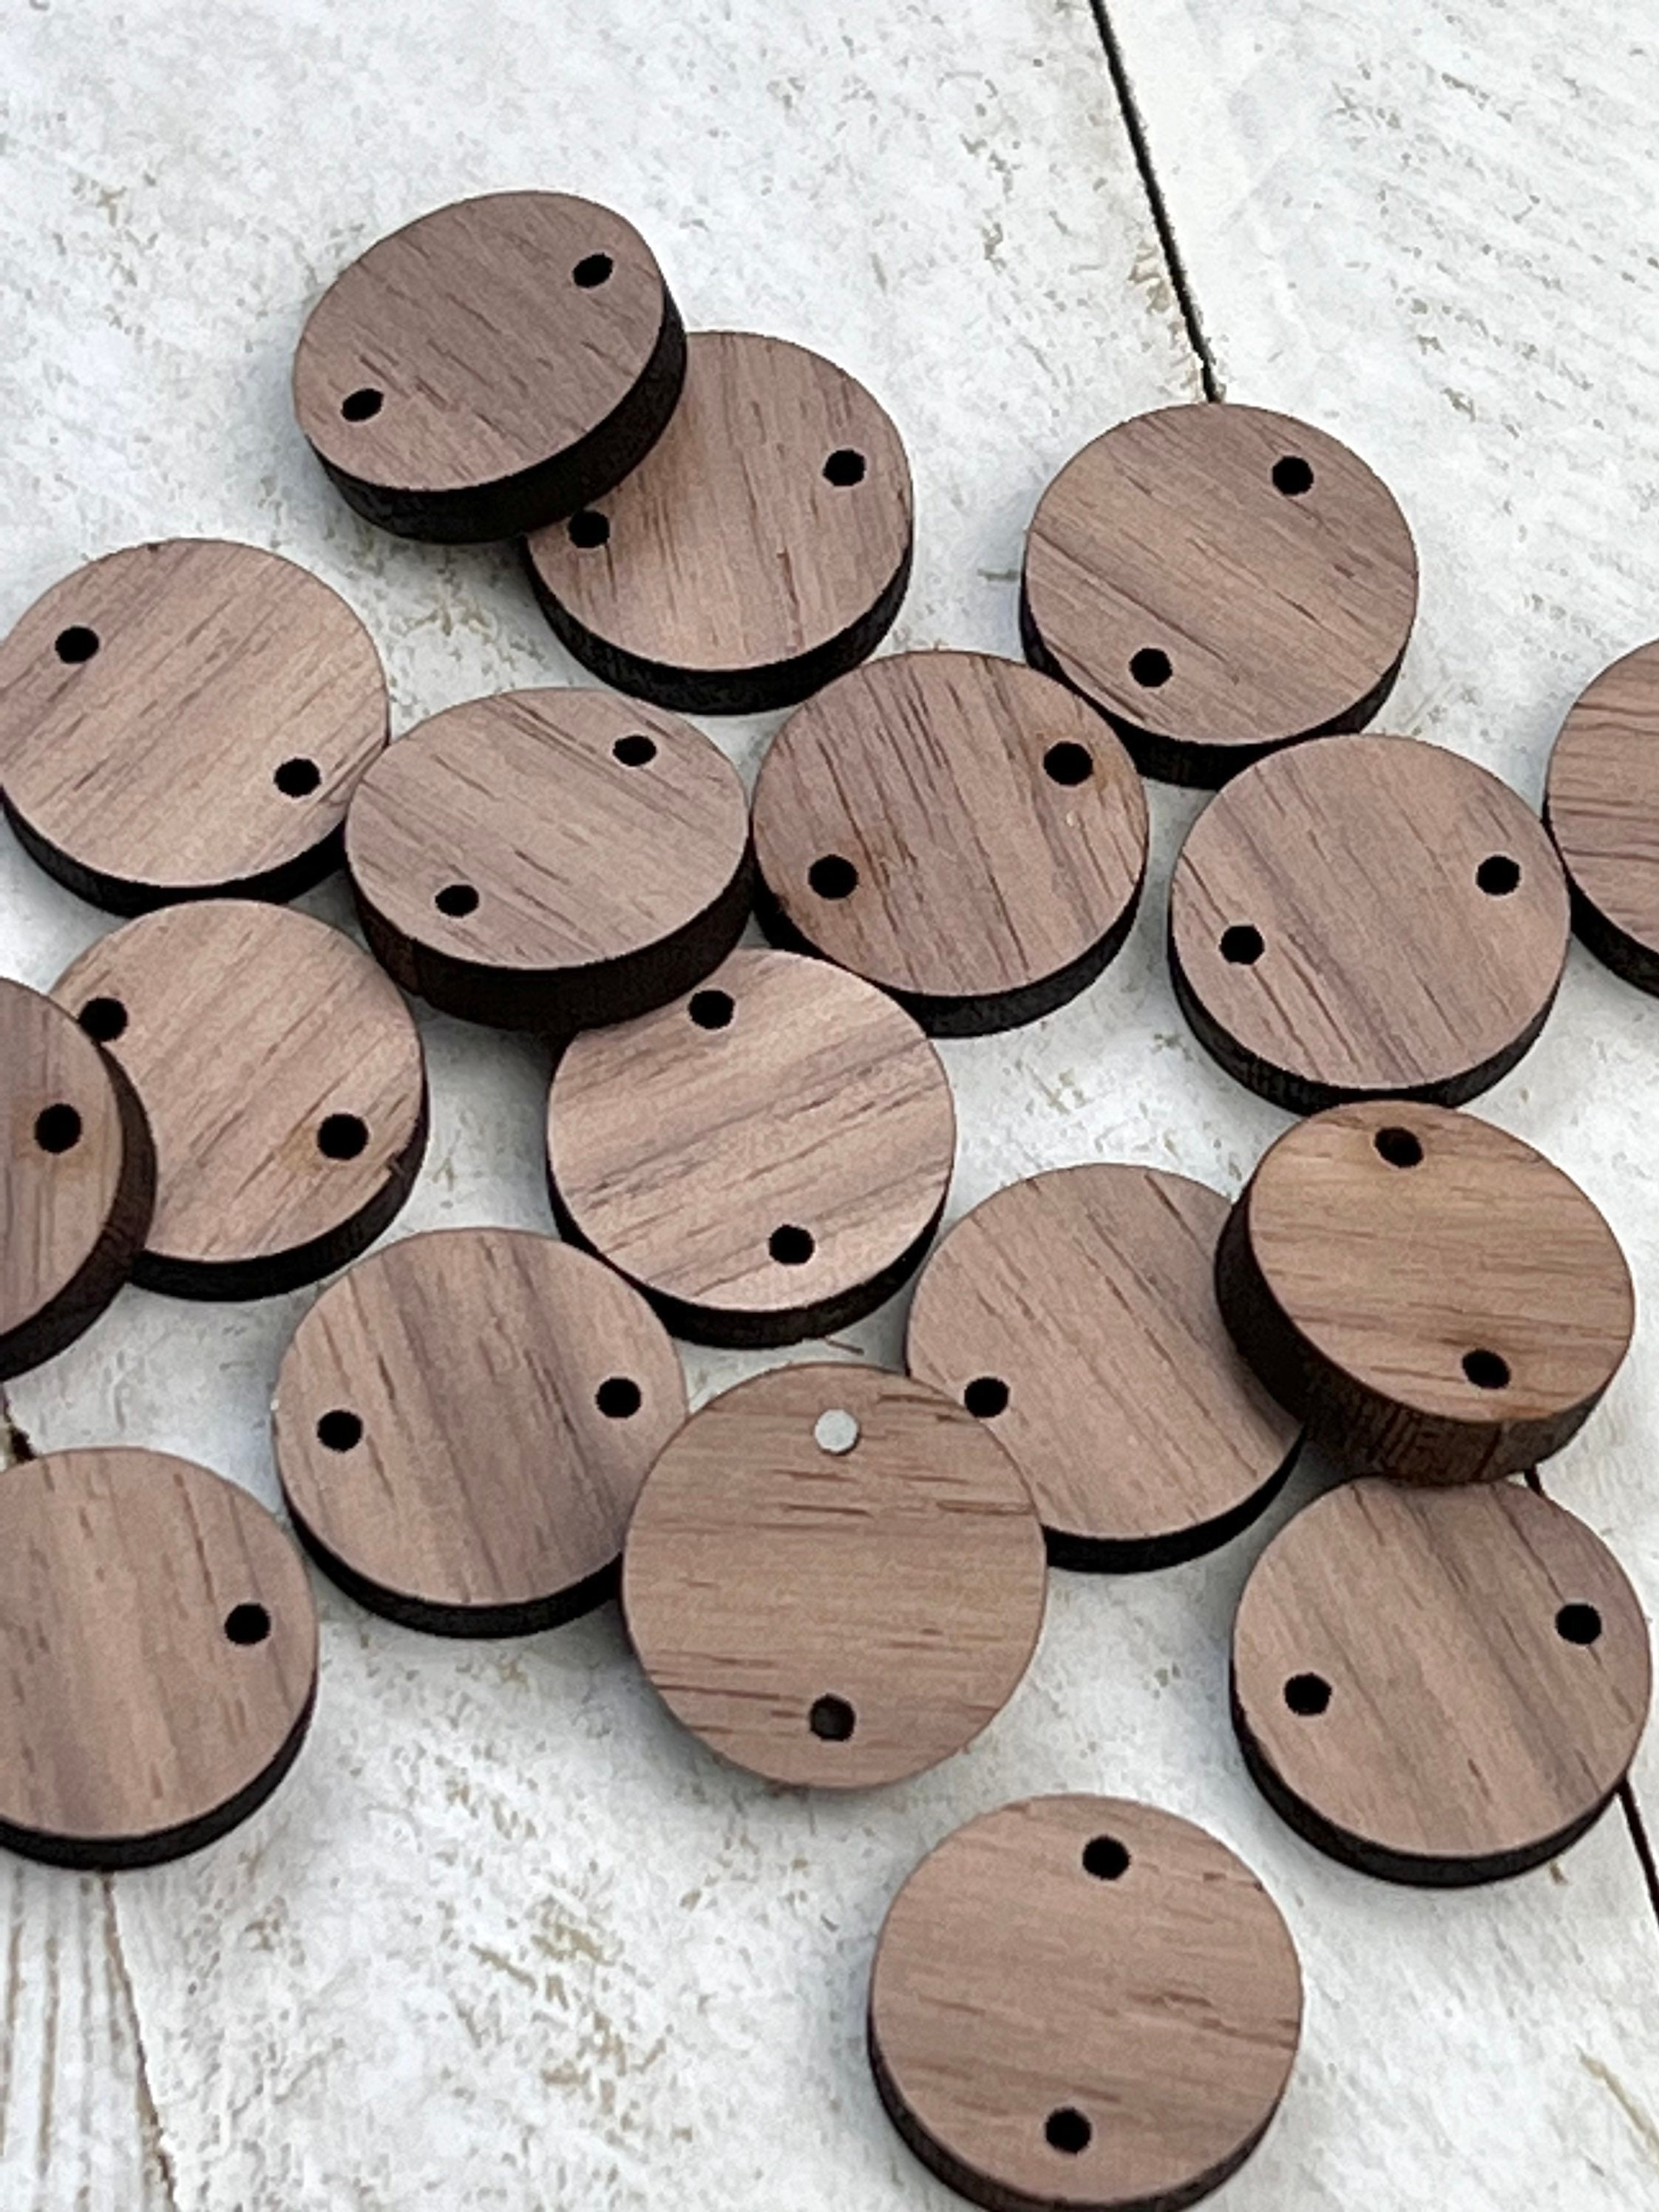  20PCS Wooden Earring Findings for Jewelry Making Walnut  WoodEarring Studs Wood Flat Round Earring Blanks Wooden Earring Posts 15mm  Earring Connectors with Loop & Back for DIY Earring Making Supplies